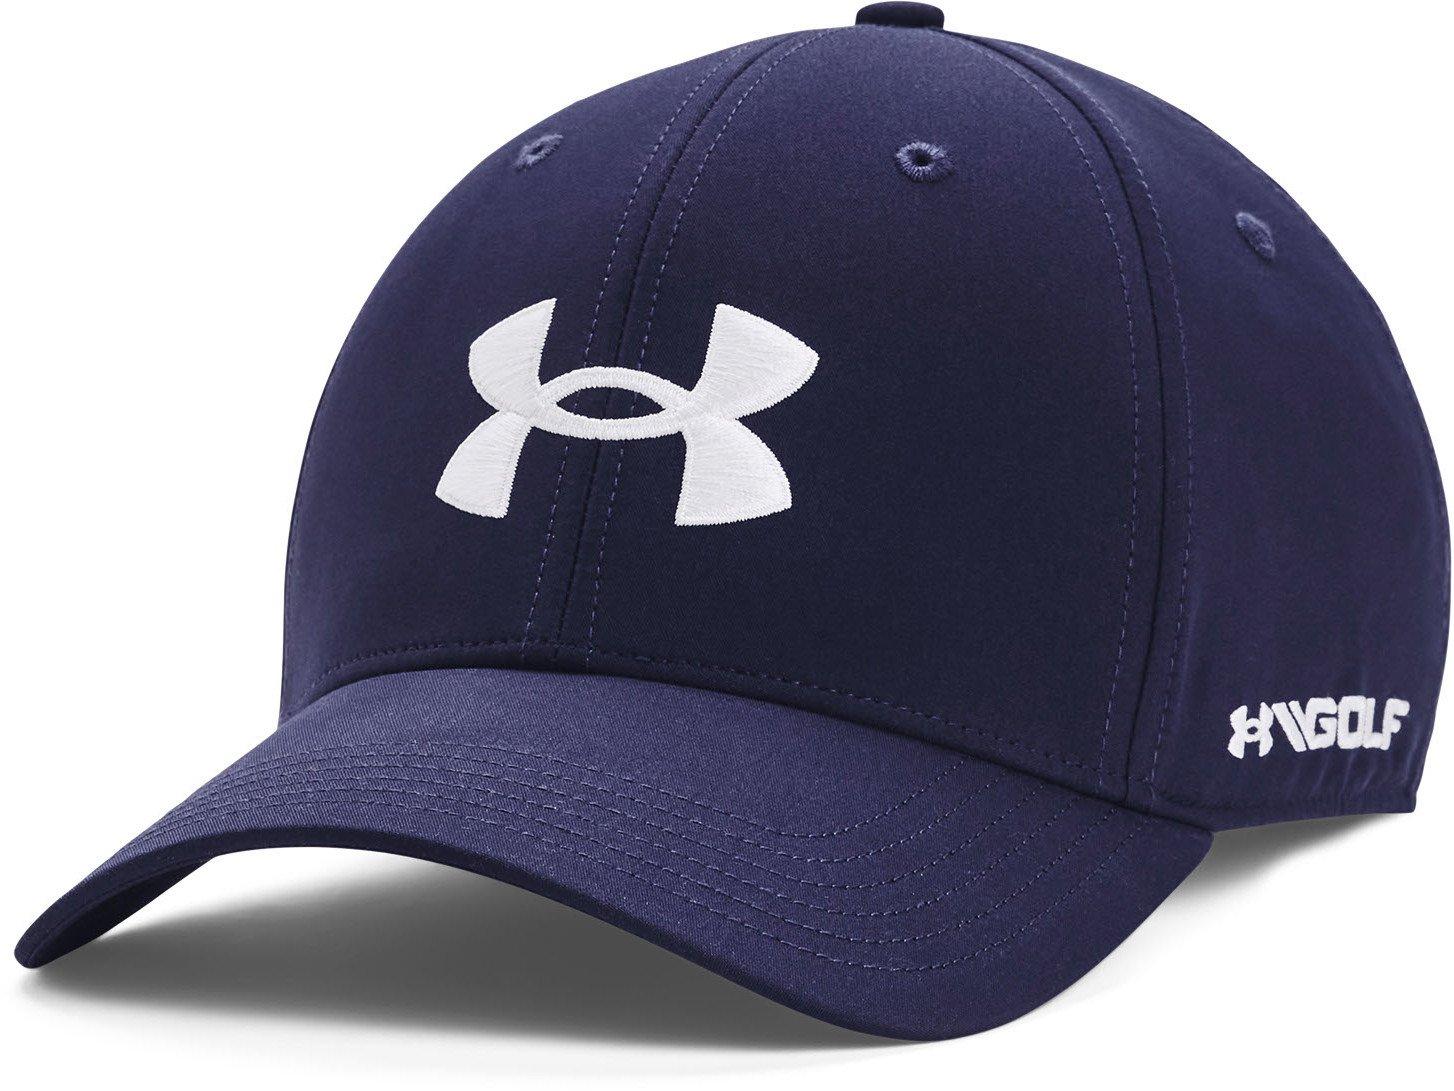 Under Armour Golf96 Hat-NVY